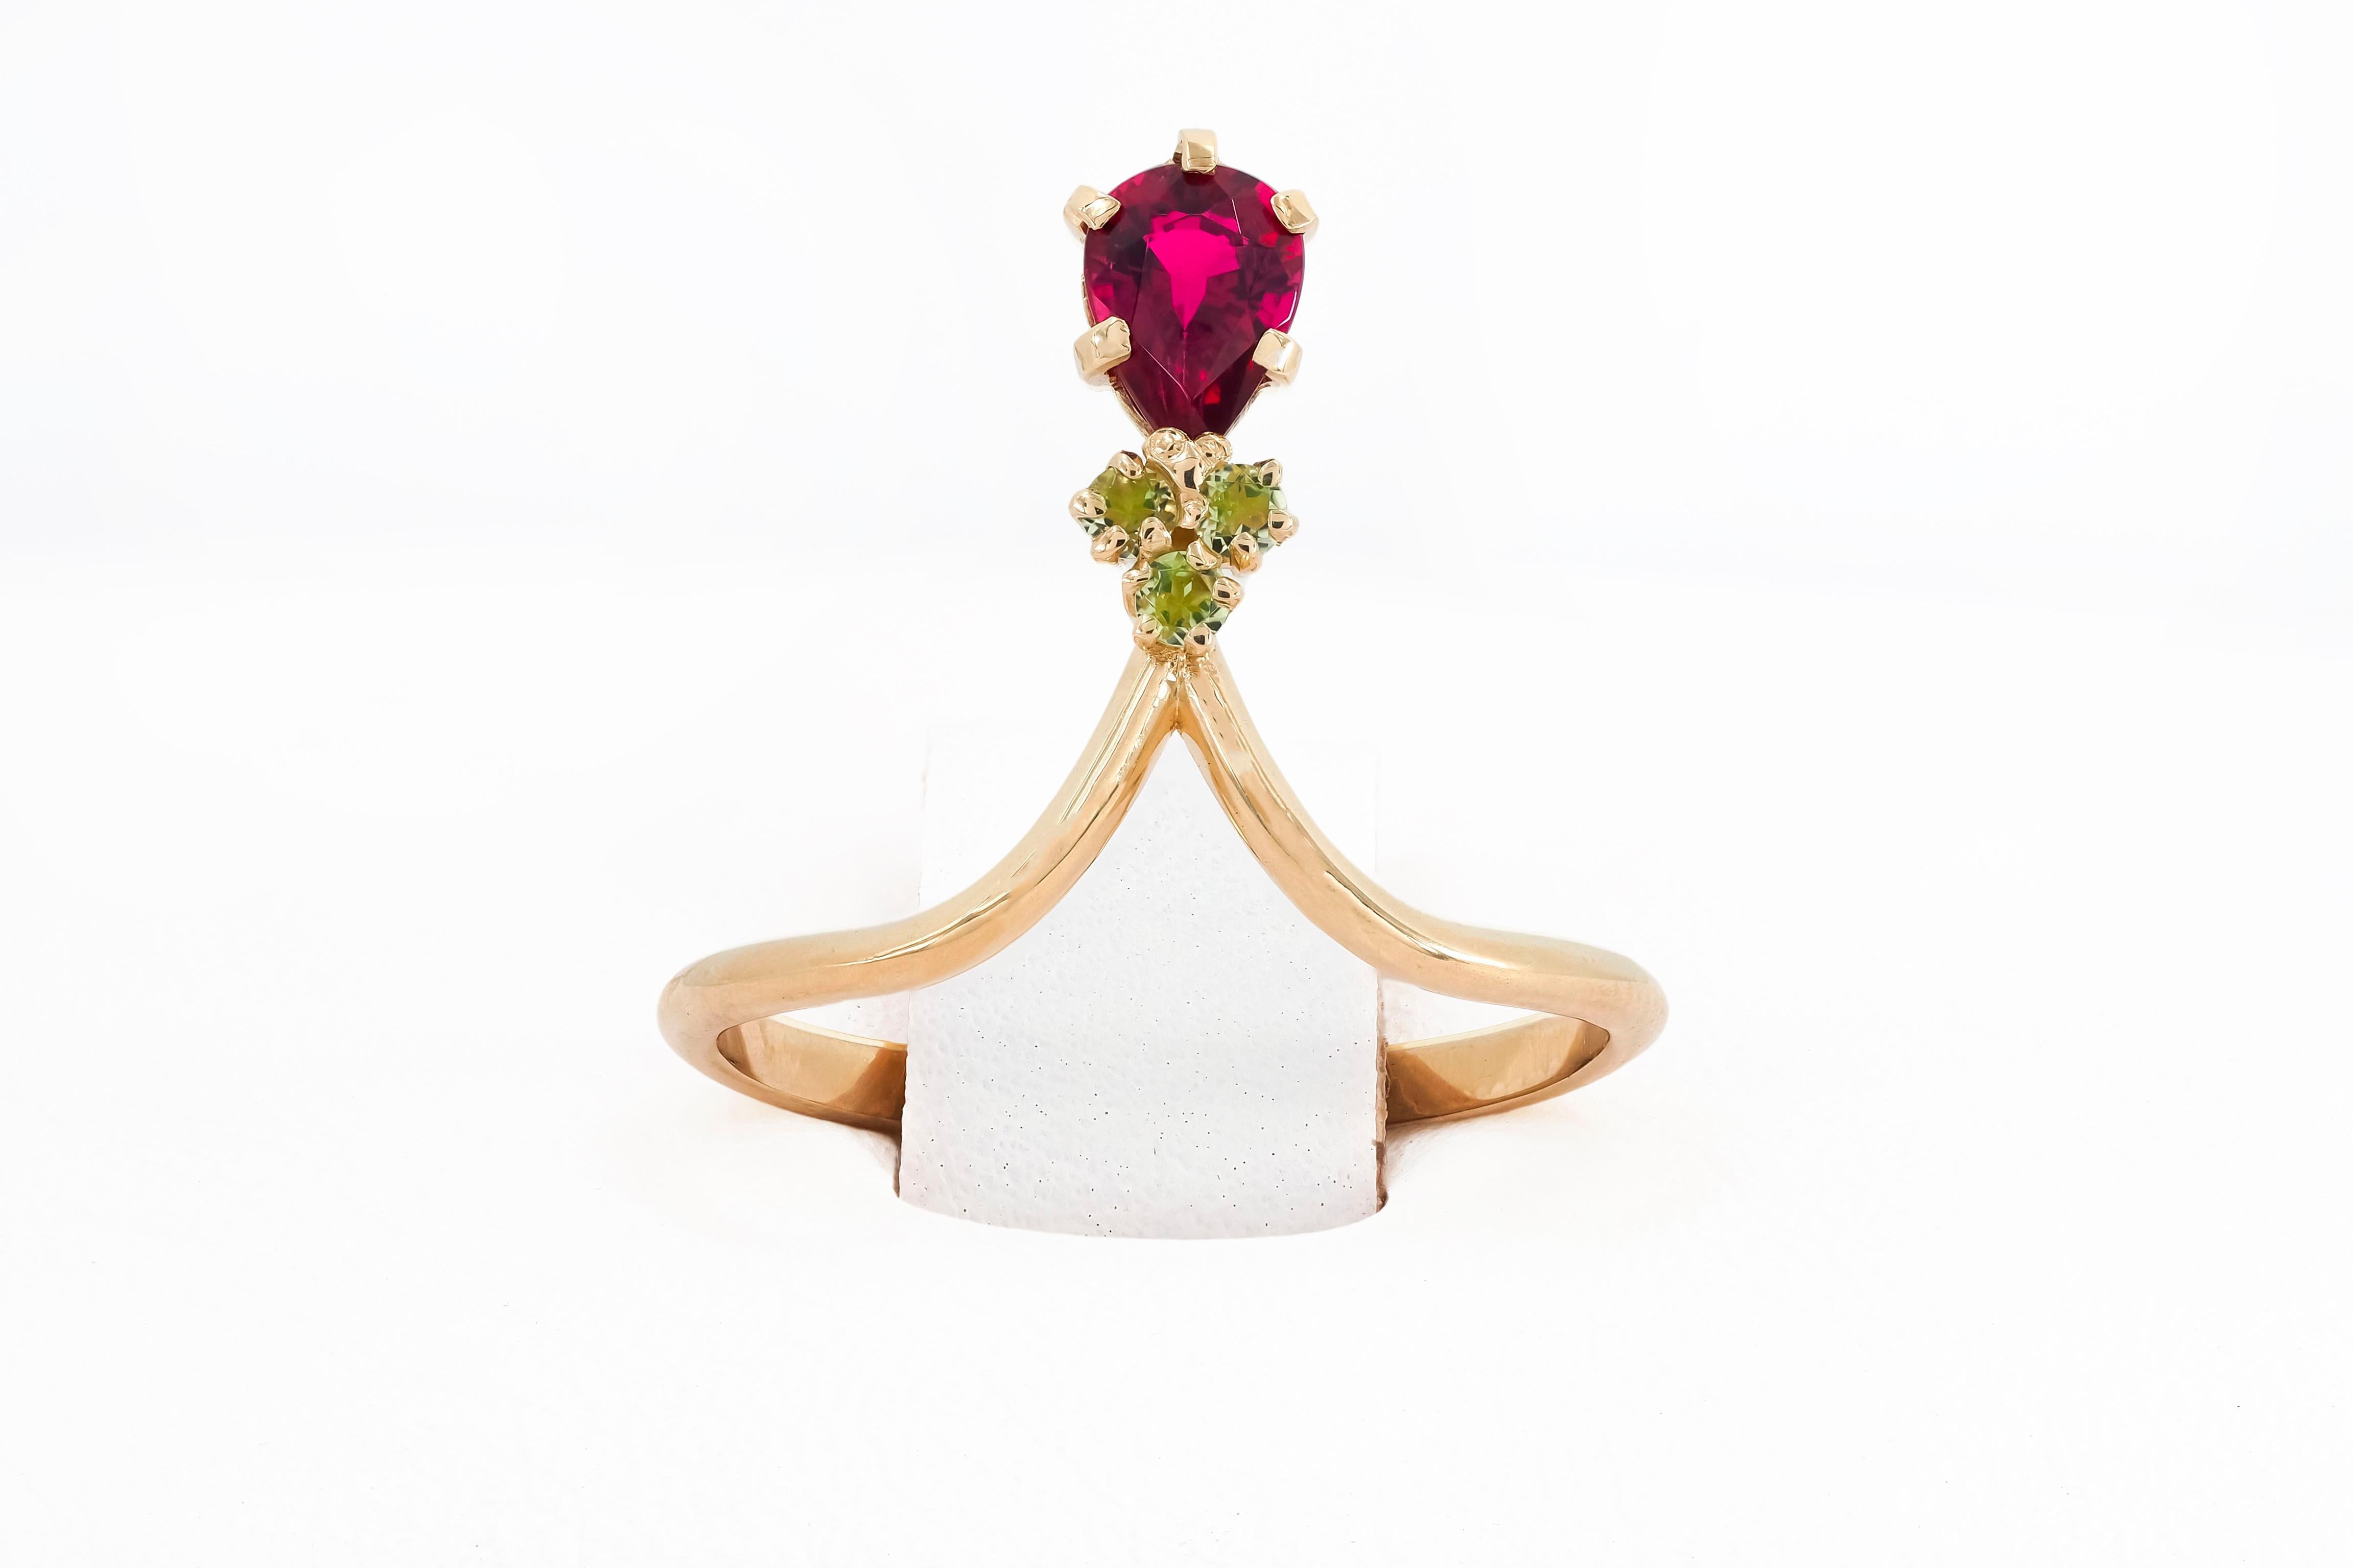 14k gold ring with tourmaline and tsavorites

Metal: 14 k gold
 weight 1.6 gr depends from size

Gemstones (all are tested by proffesional gemmologist)

Tourmaline
Pear cut, 0.8 ct, transparent,  red (rubellite) color. 

Tsavorites (green